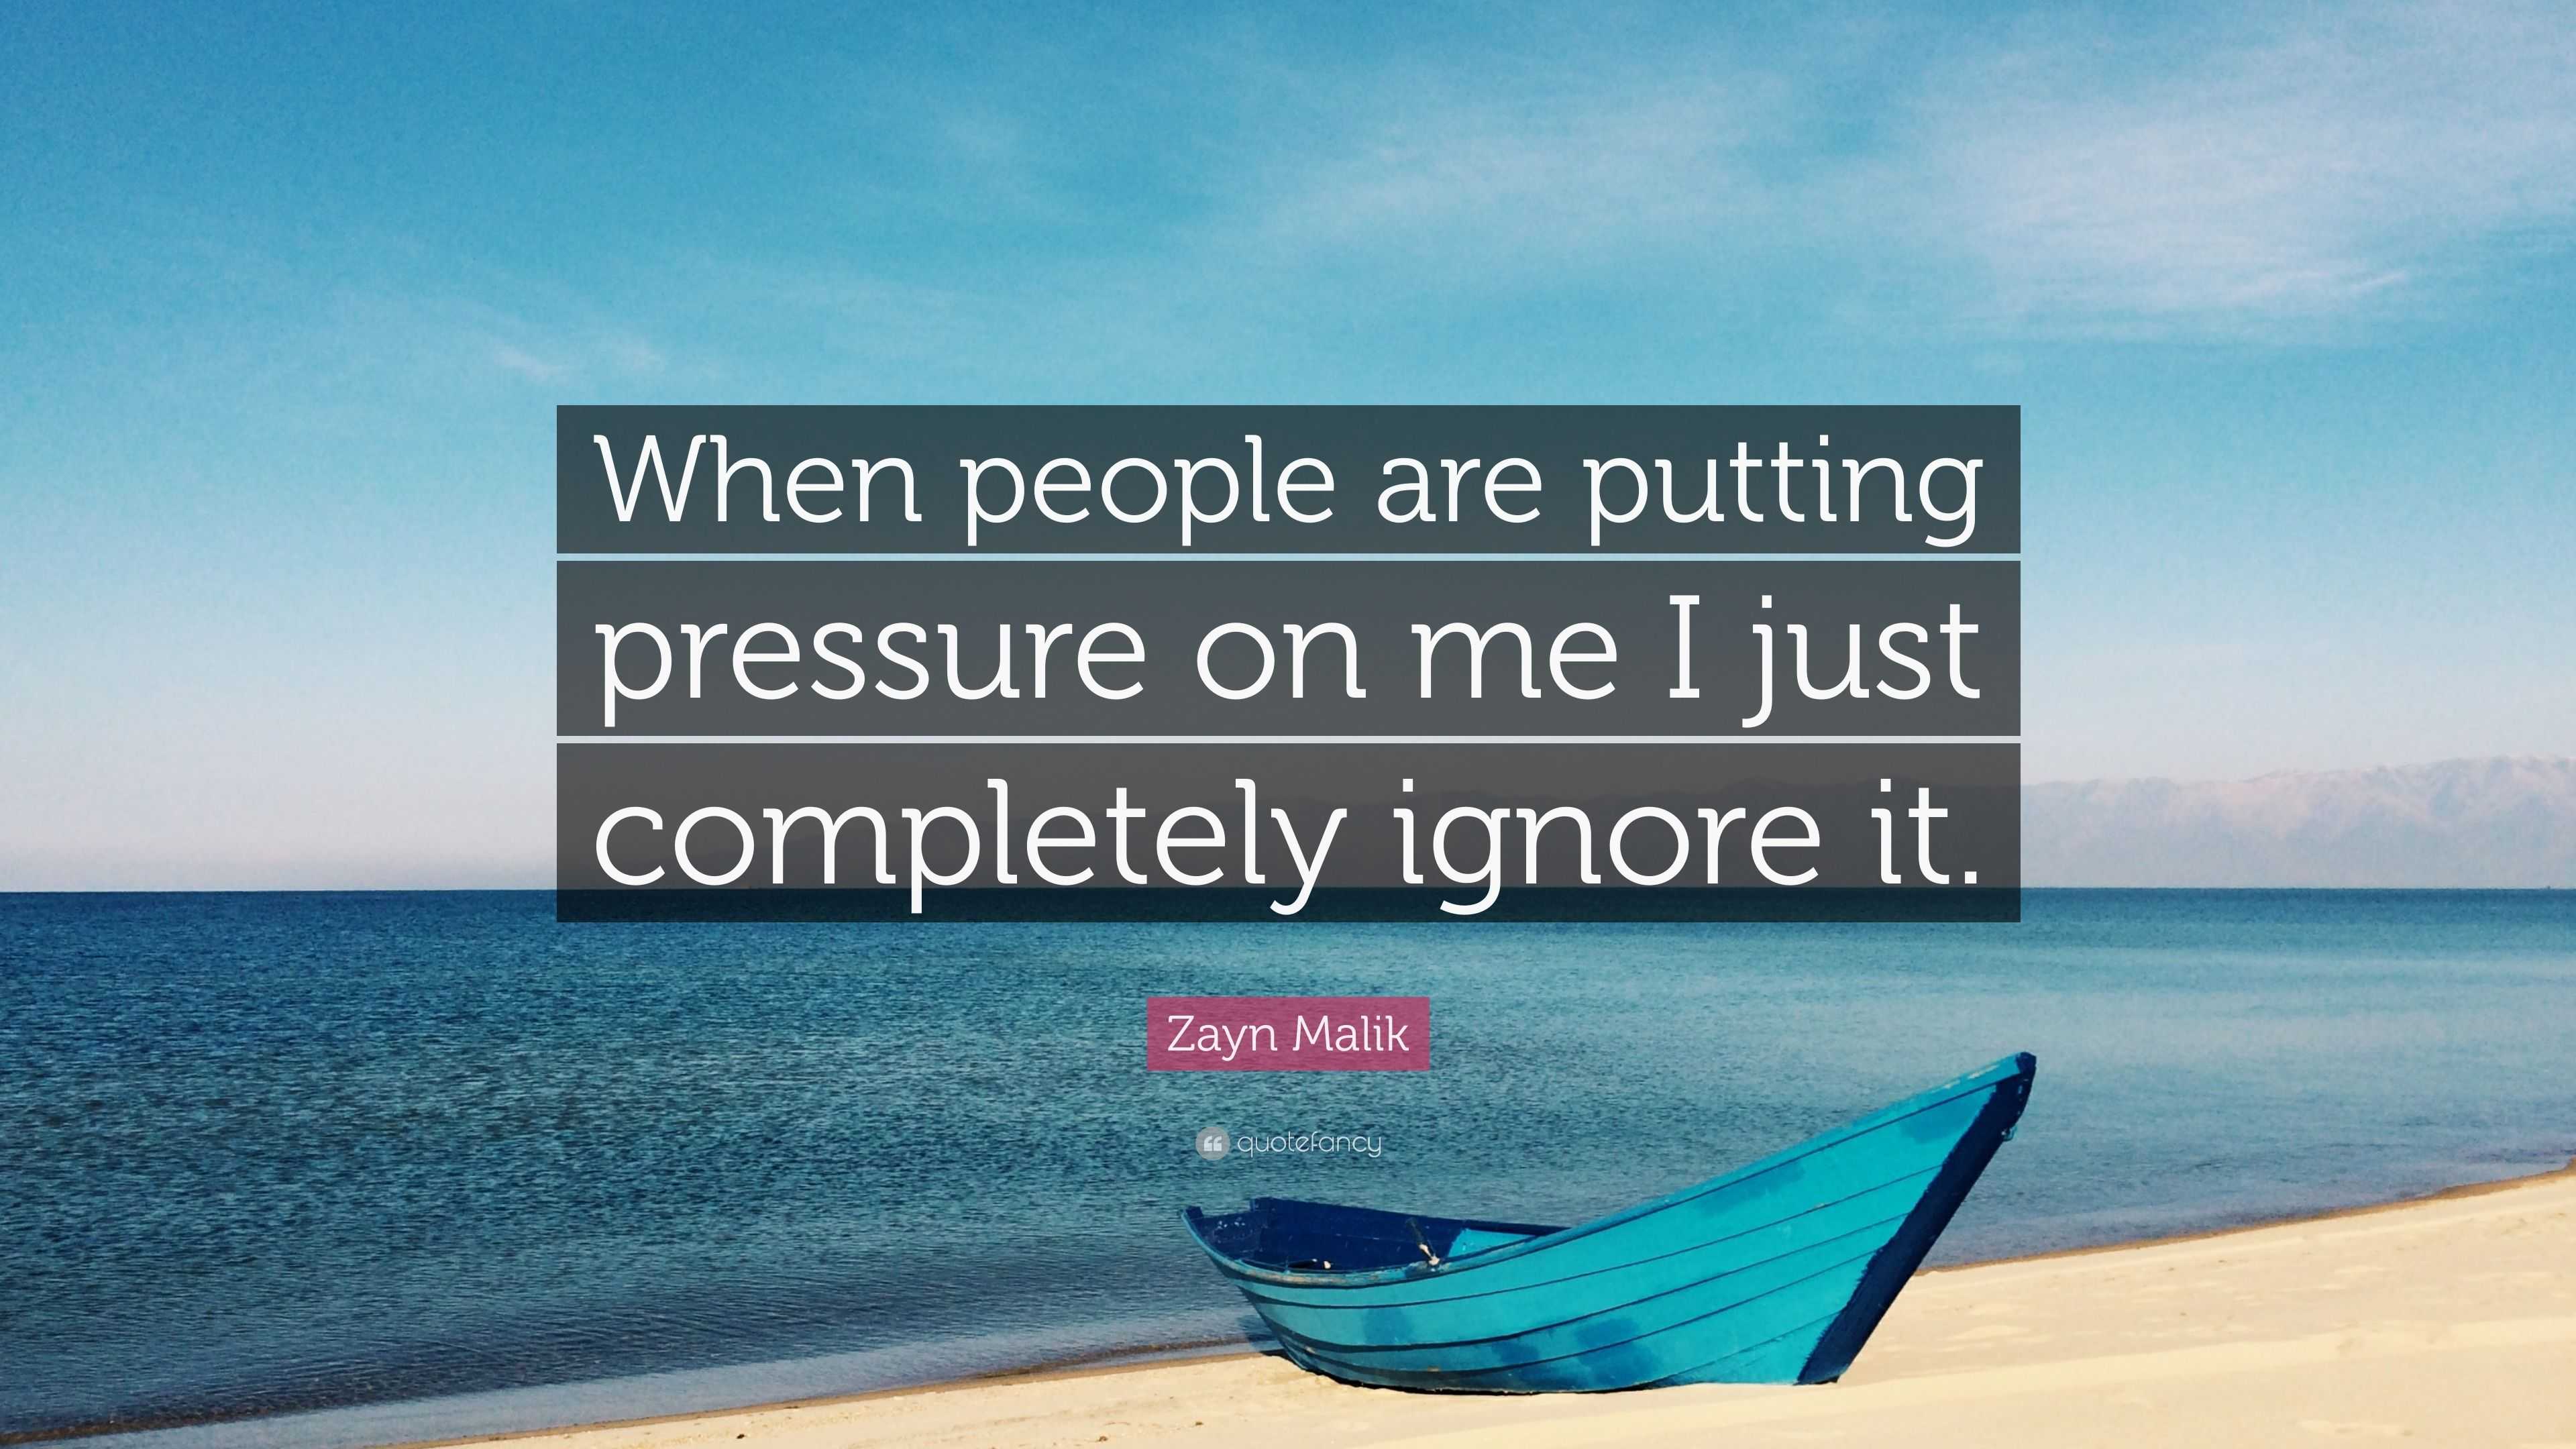 Zayn Malik Quote: “When people are putting pressure on me I just completely  ignore it.”